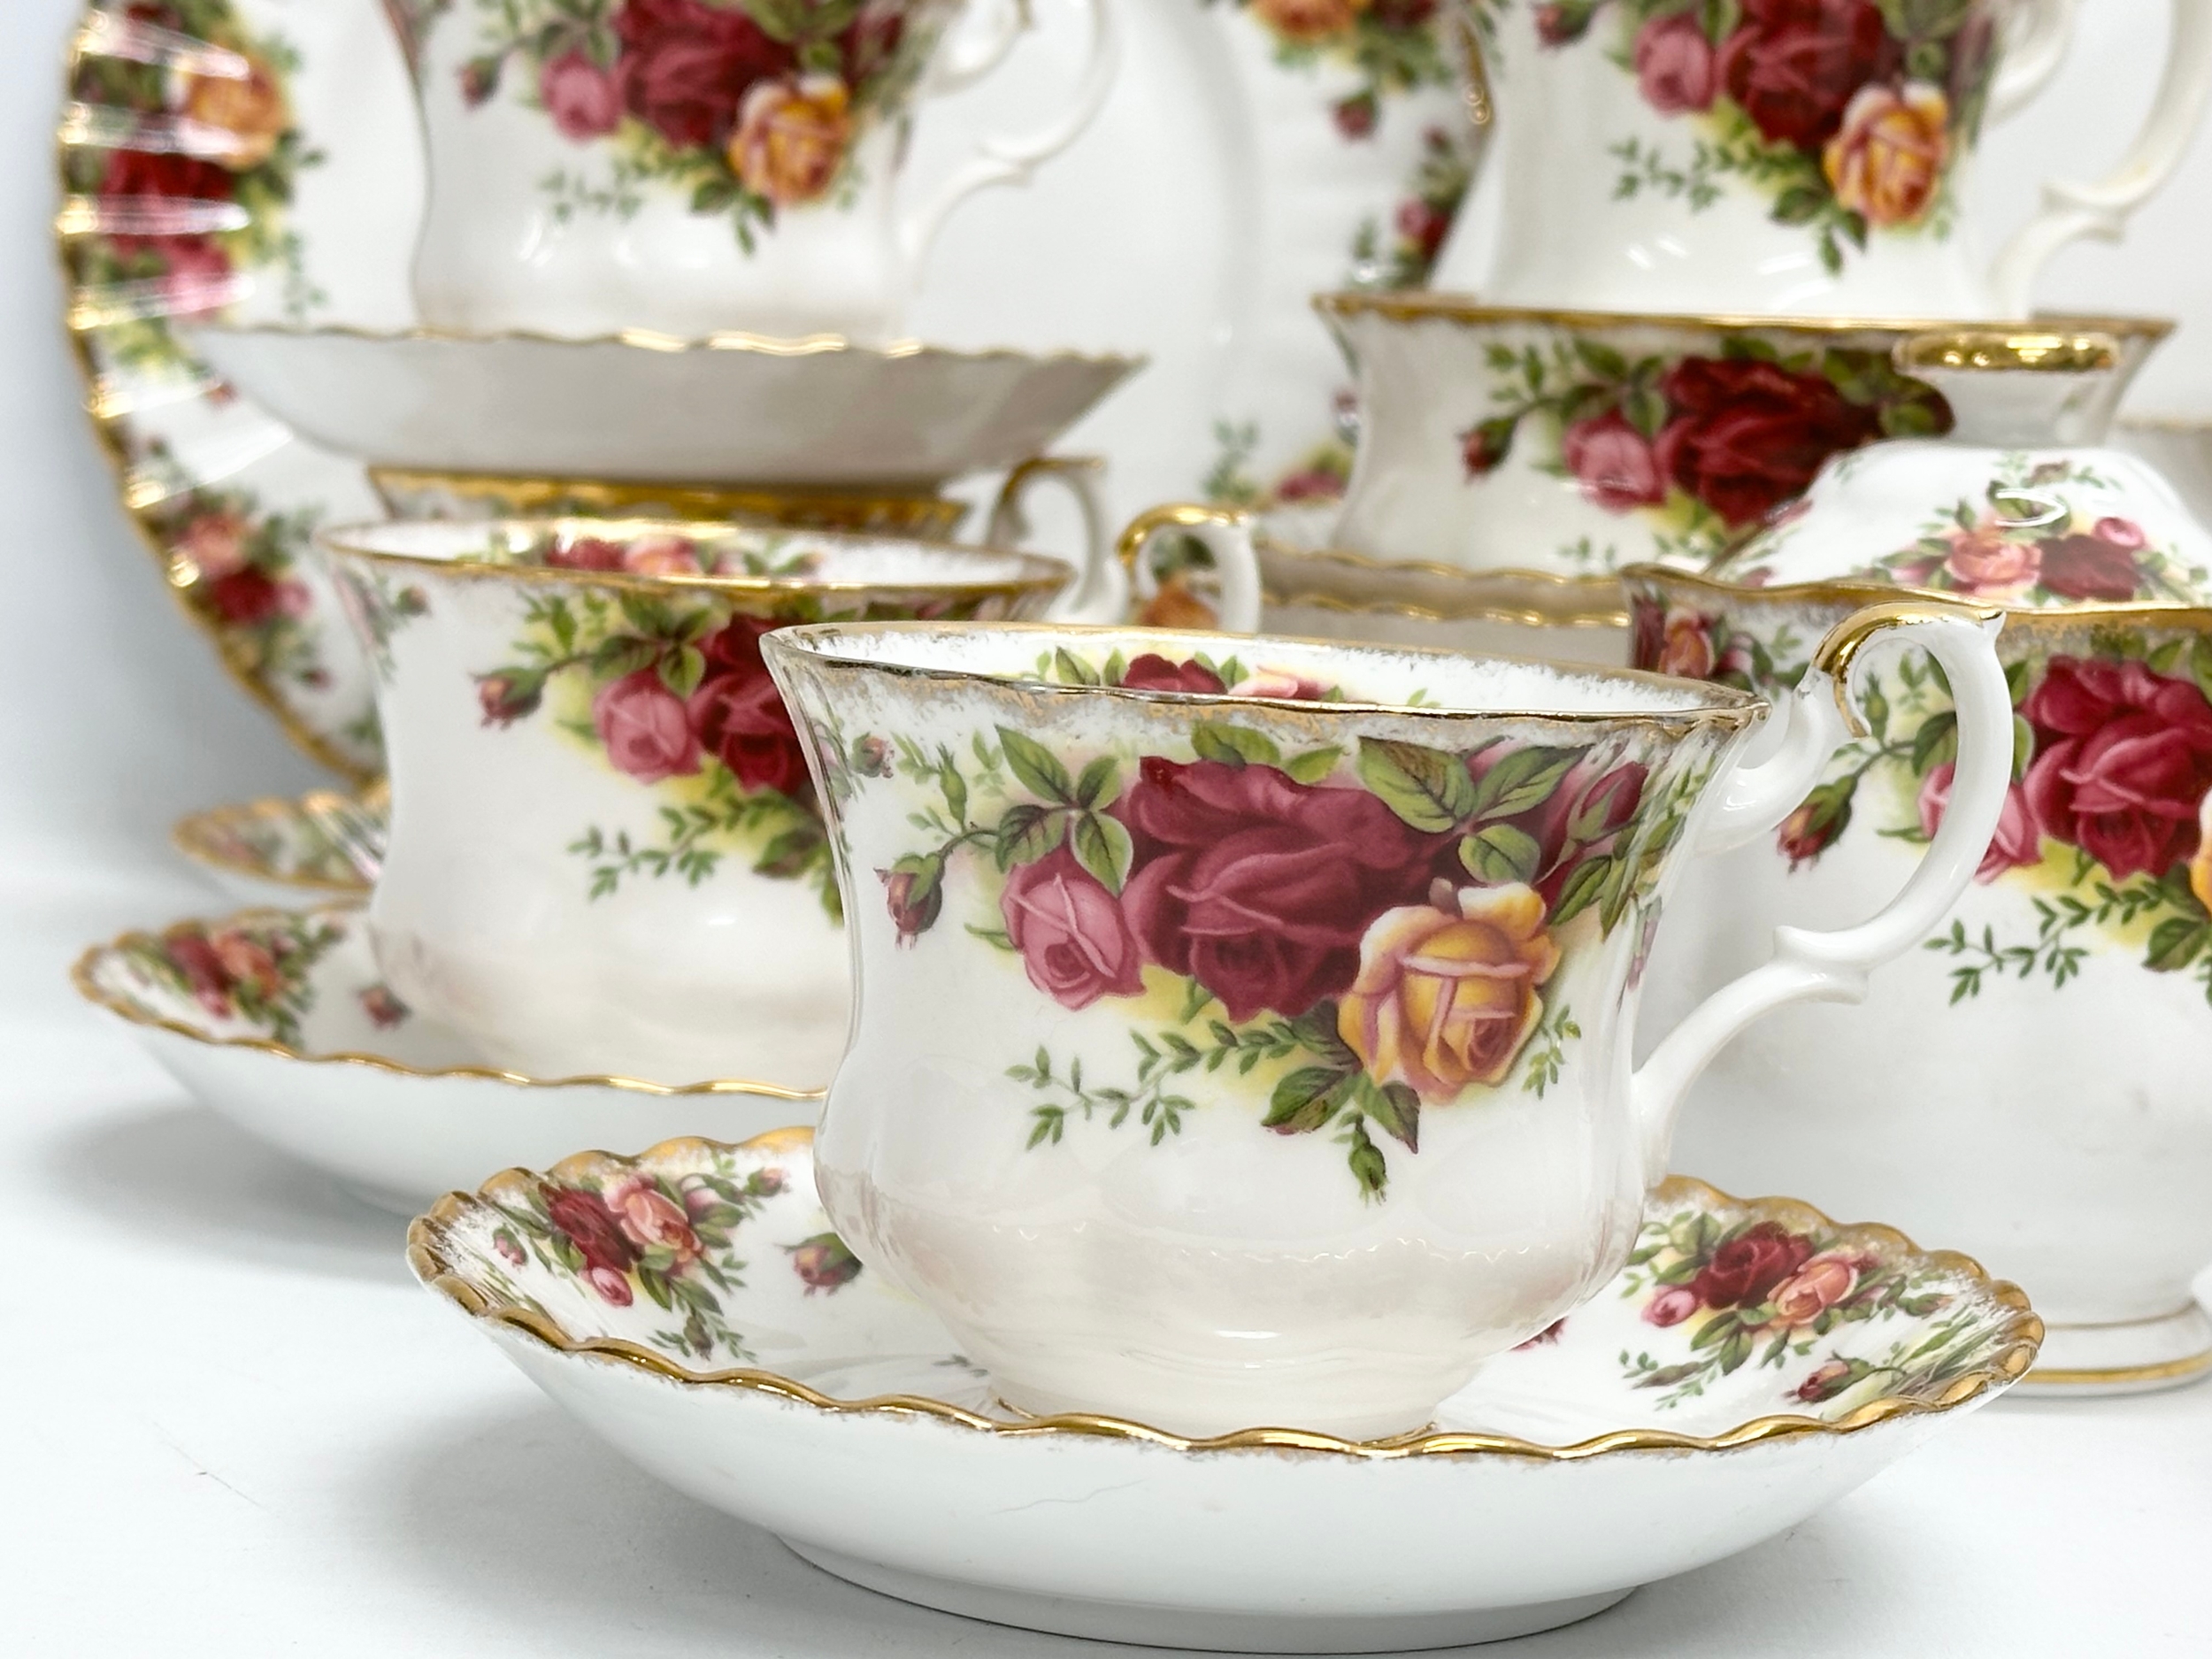 32 piece of Royal Albert ‘Old Country Roses’ tea service. 2 salad plates, a vase, sugar bowl with - Image 4 of 6